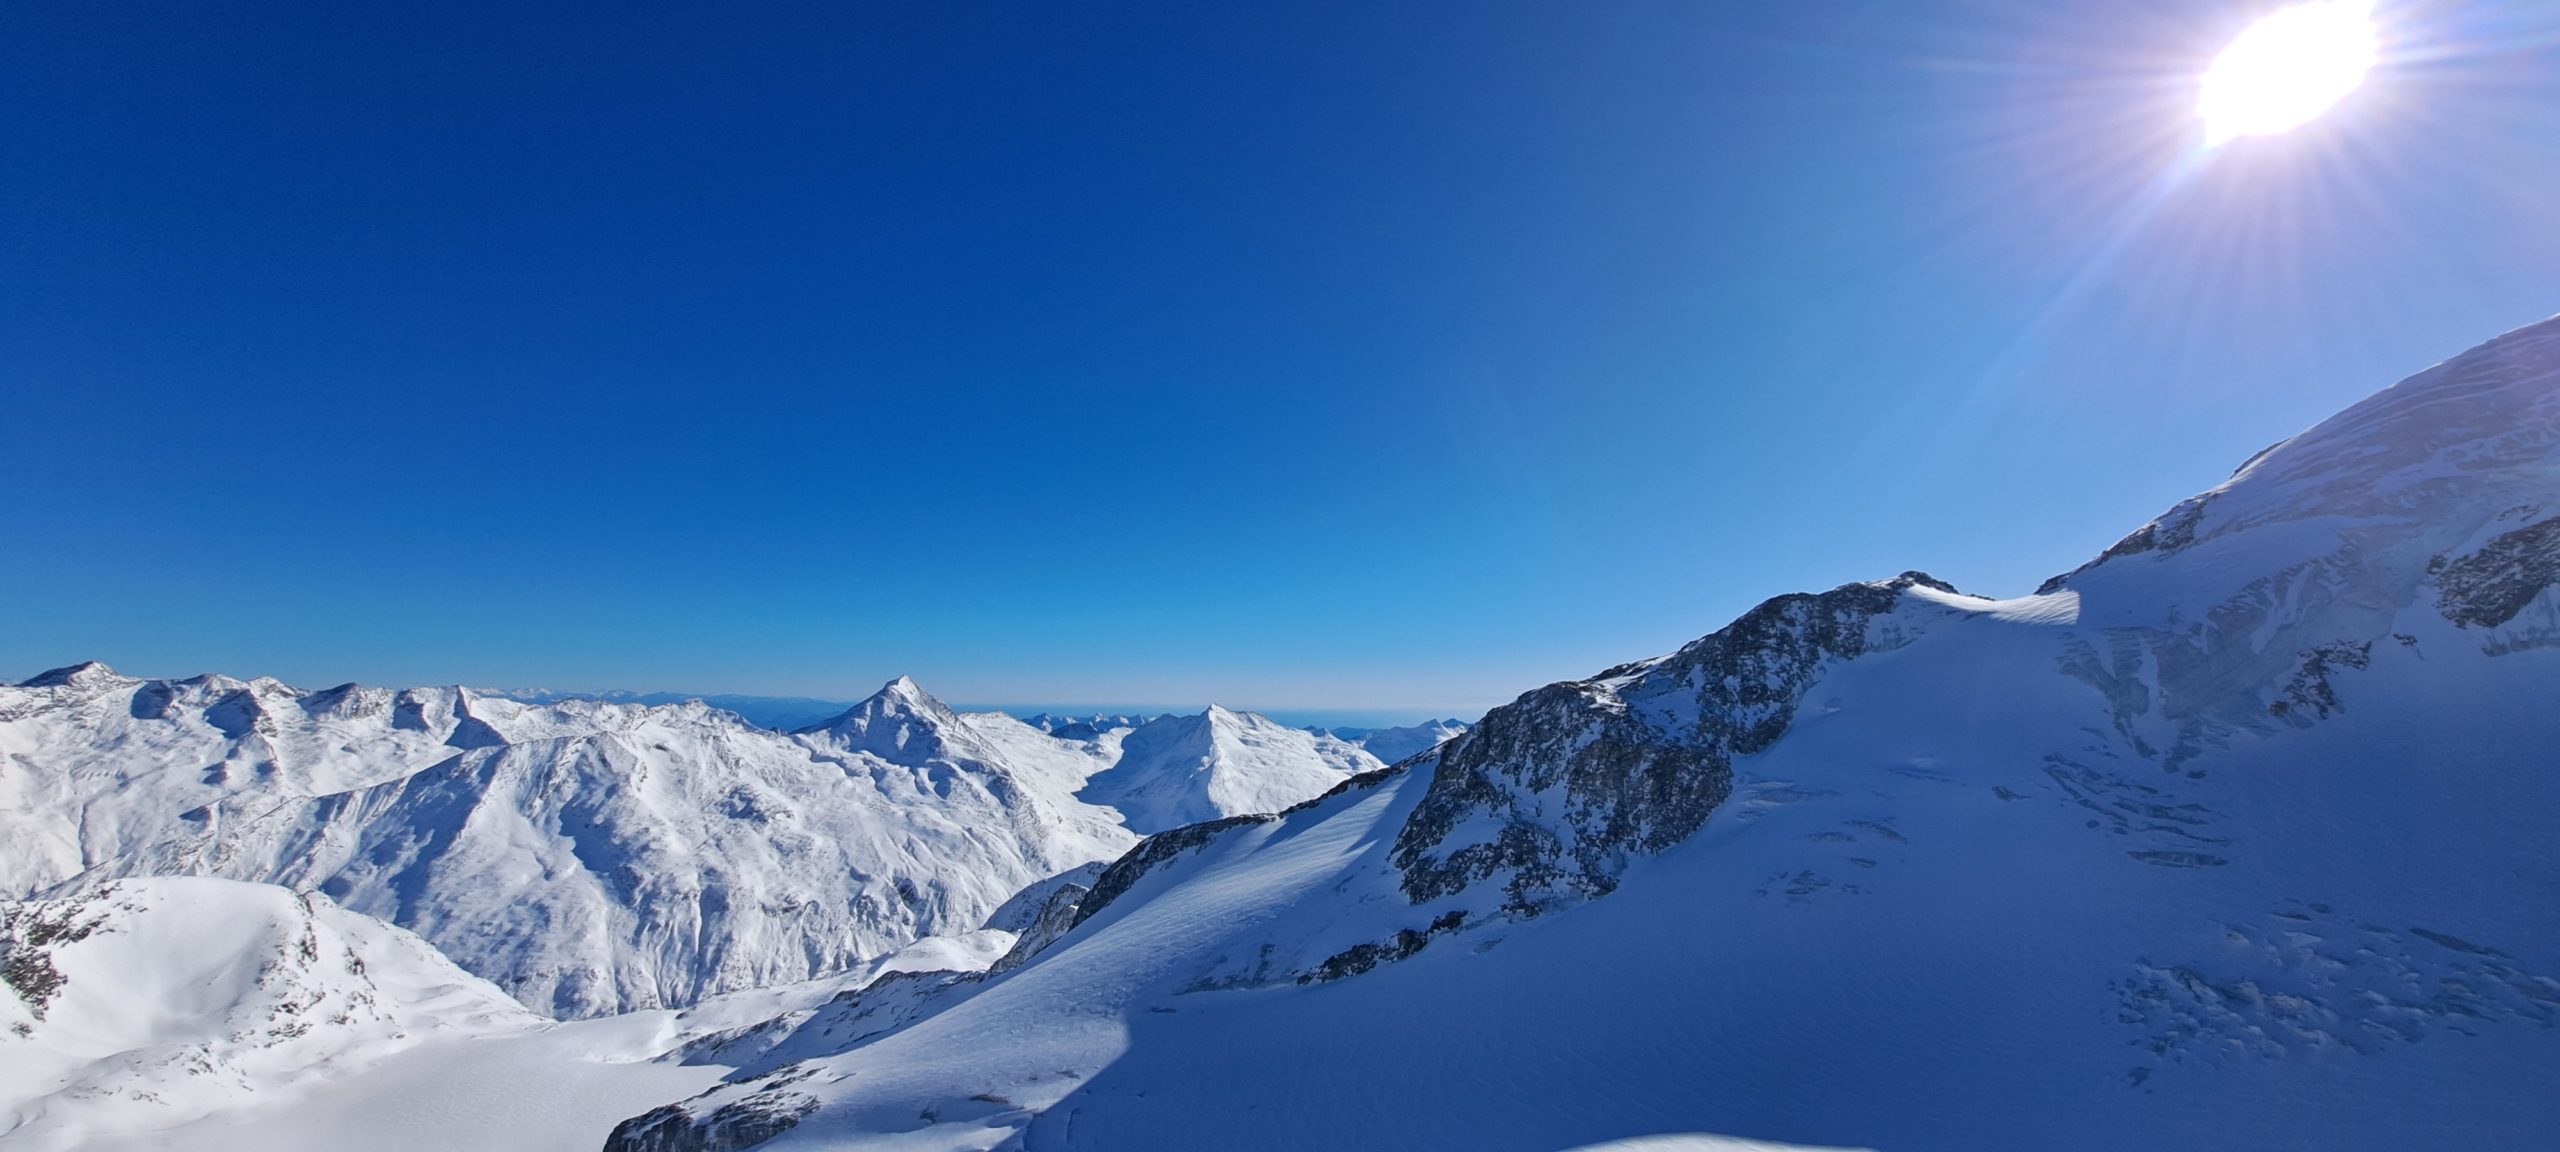 A 360-degree panorama of the Alps